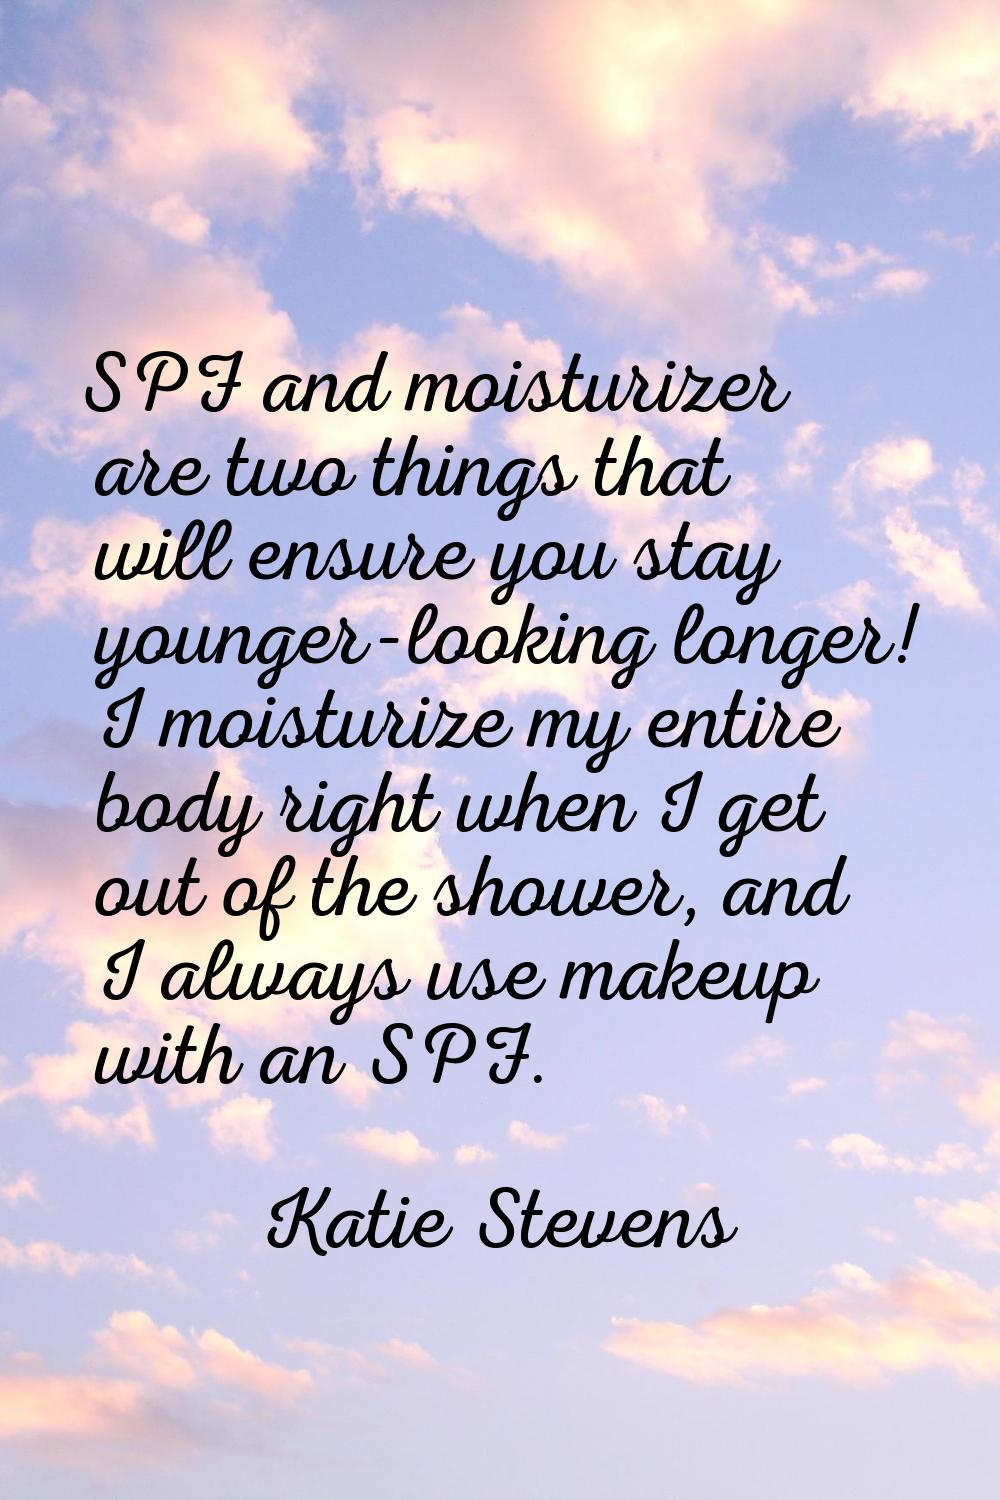 SPF and moisturizer are two things that will ensure you stay younger-looking longer! I moisturize m